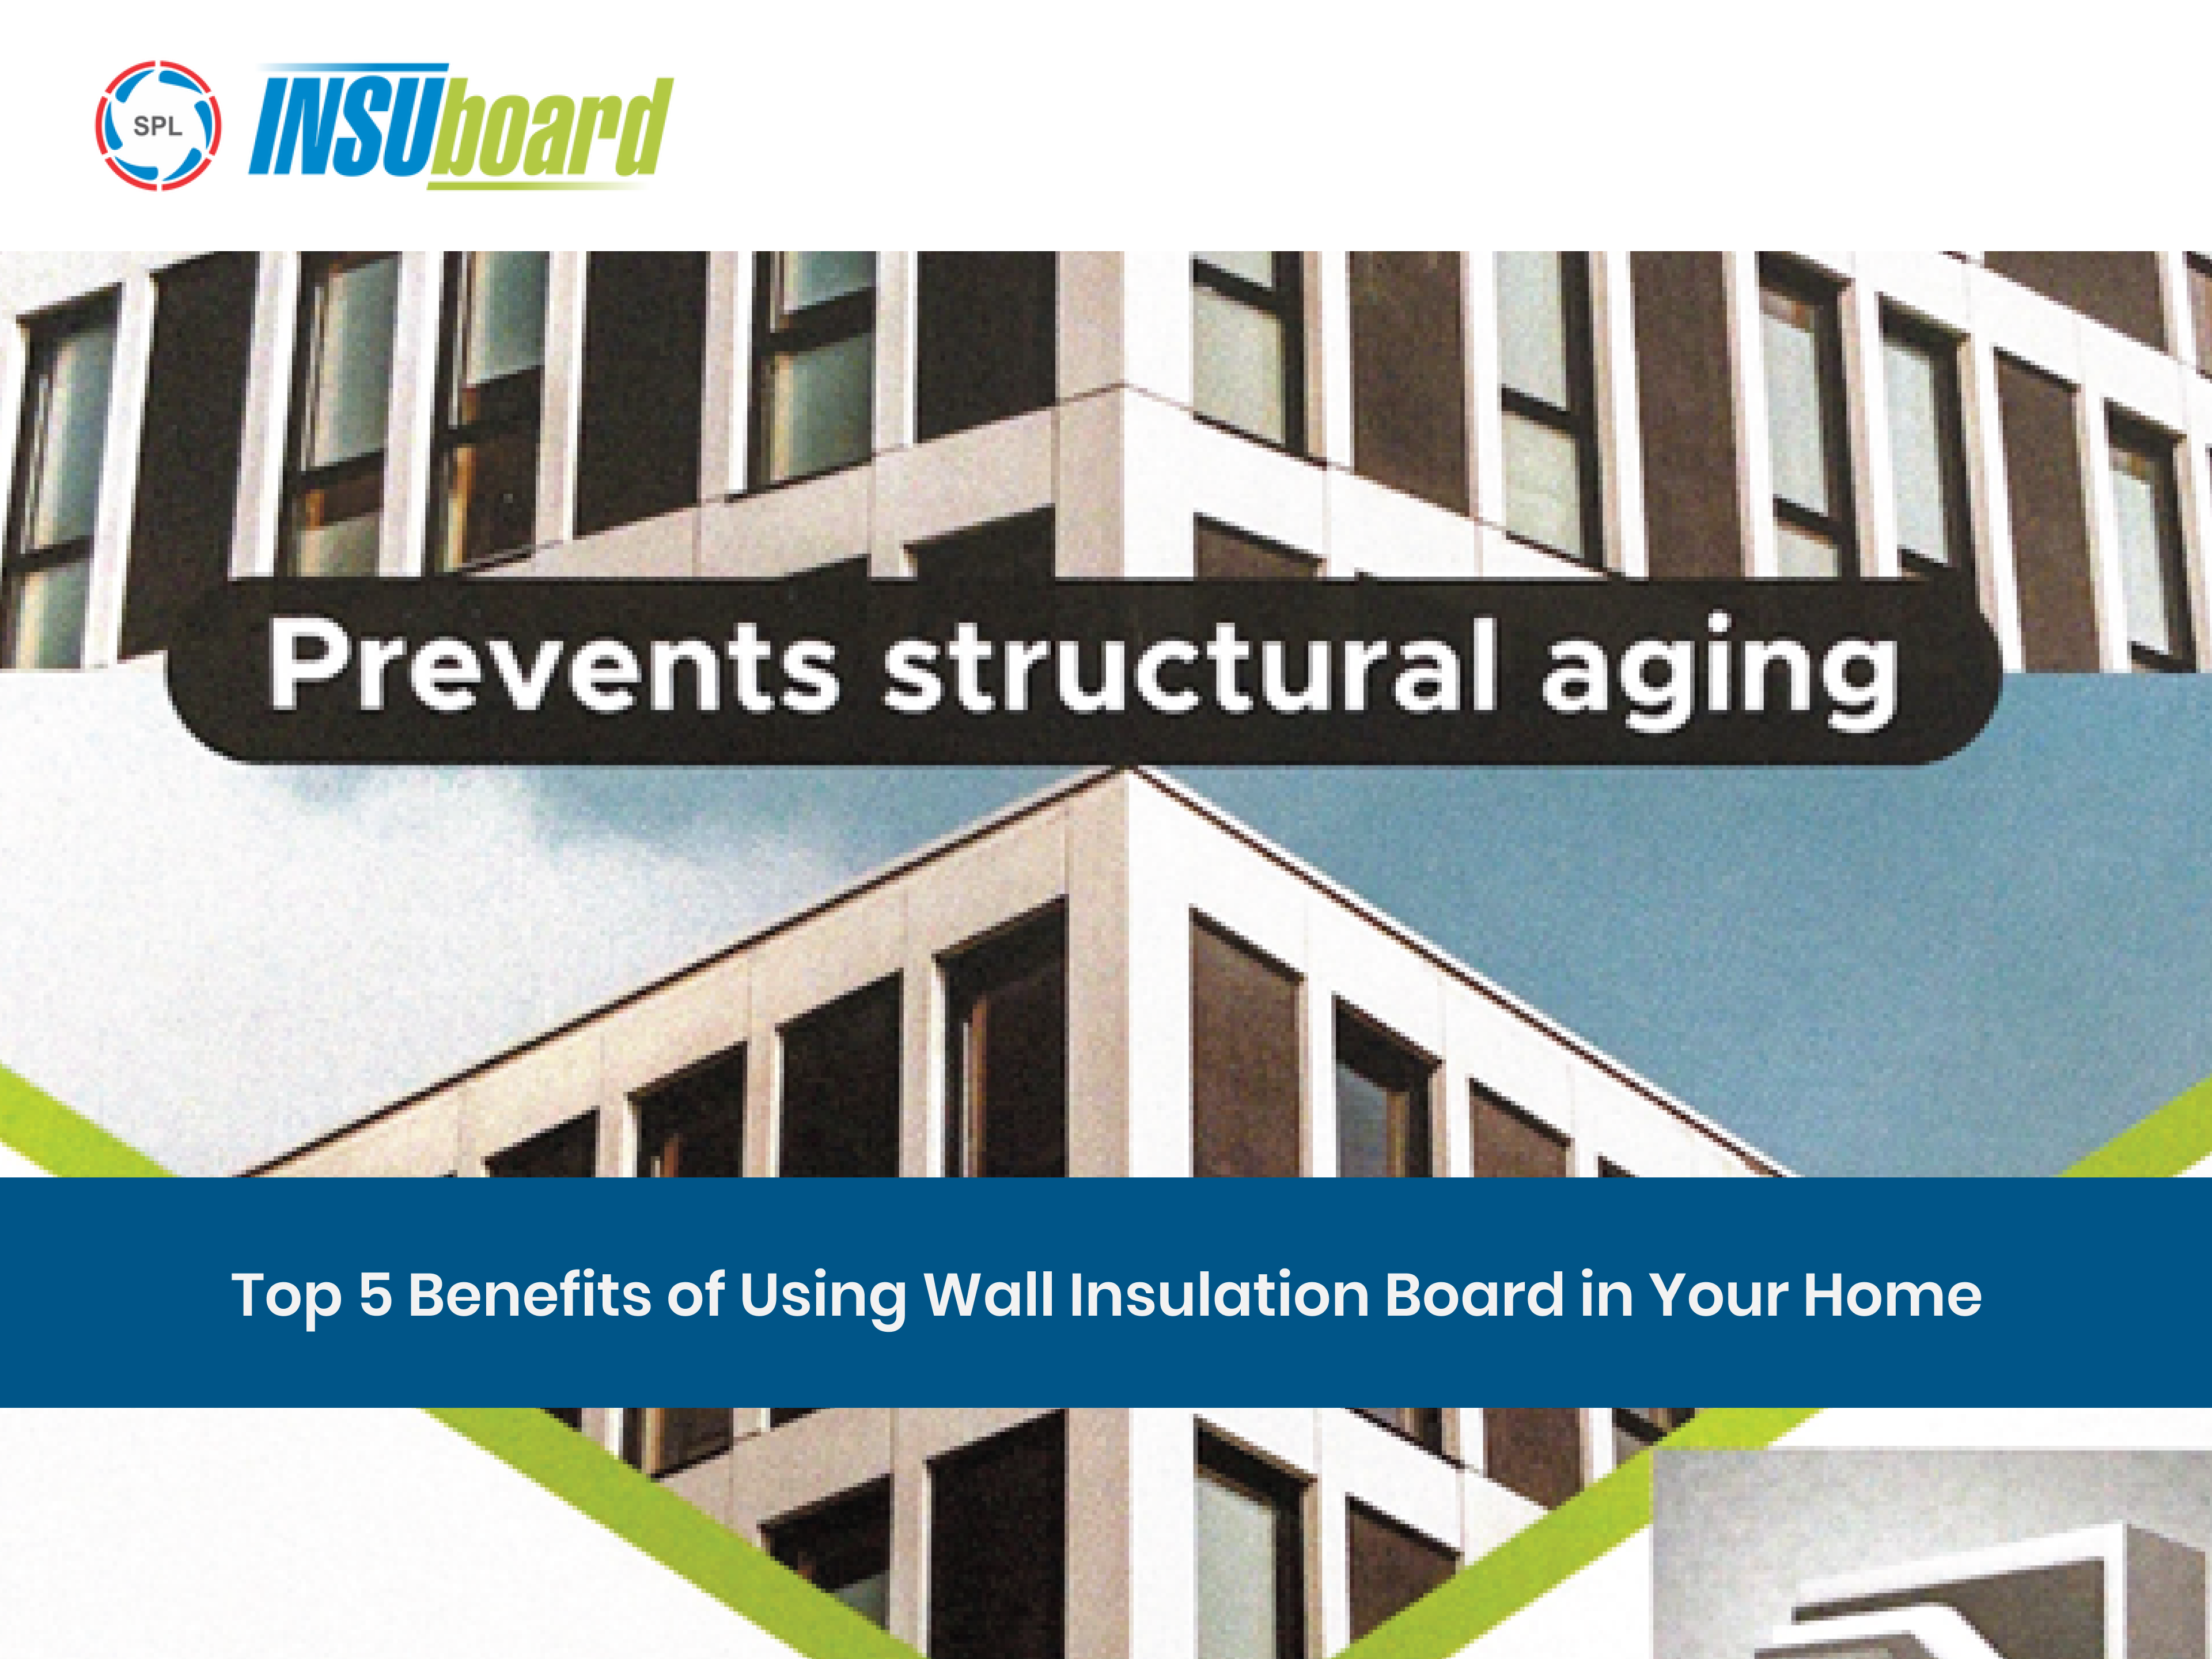 Top 5 Benefits of Using Wall Insulation Board in Your Home